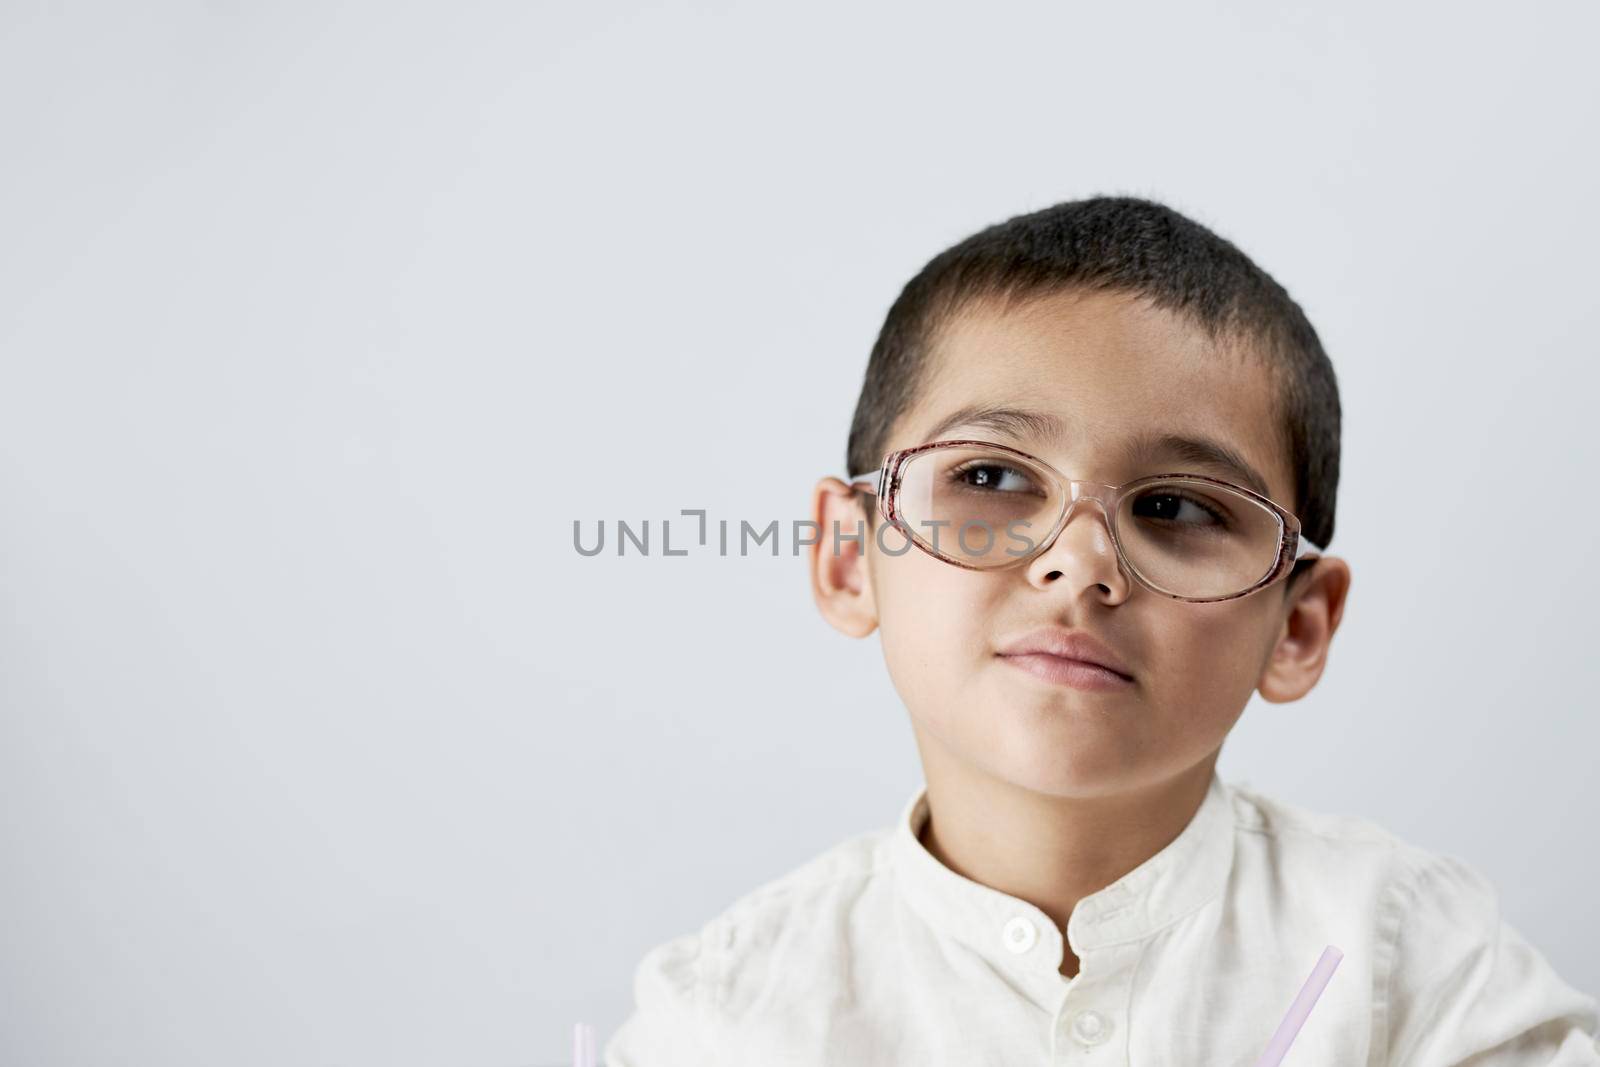 Smart boy in glasses against the white background